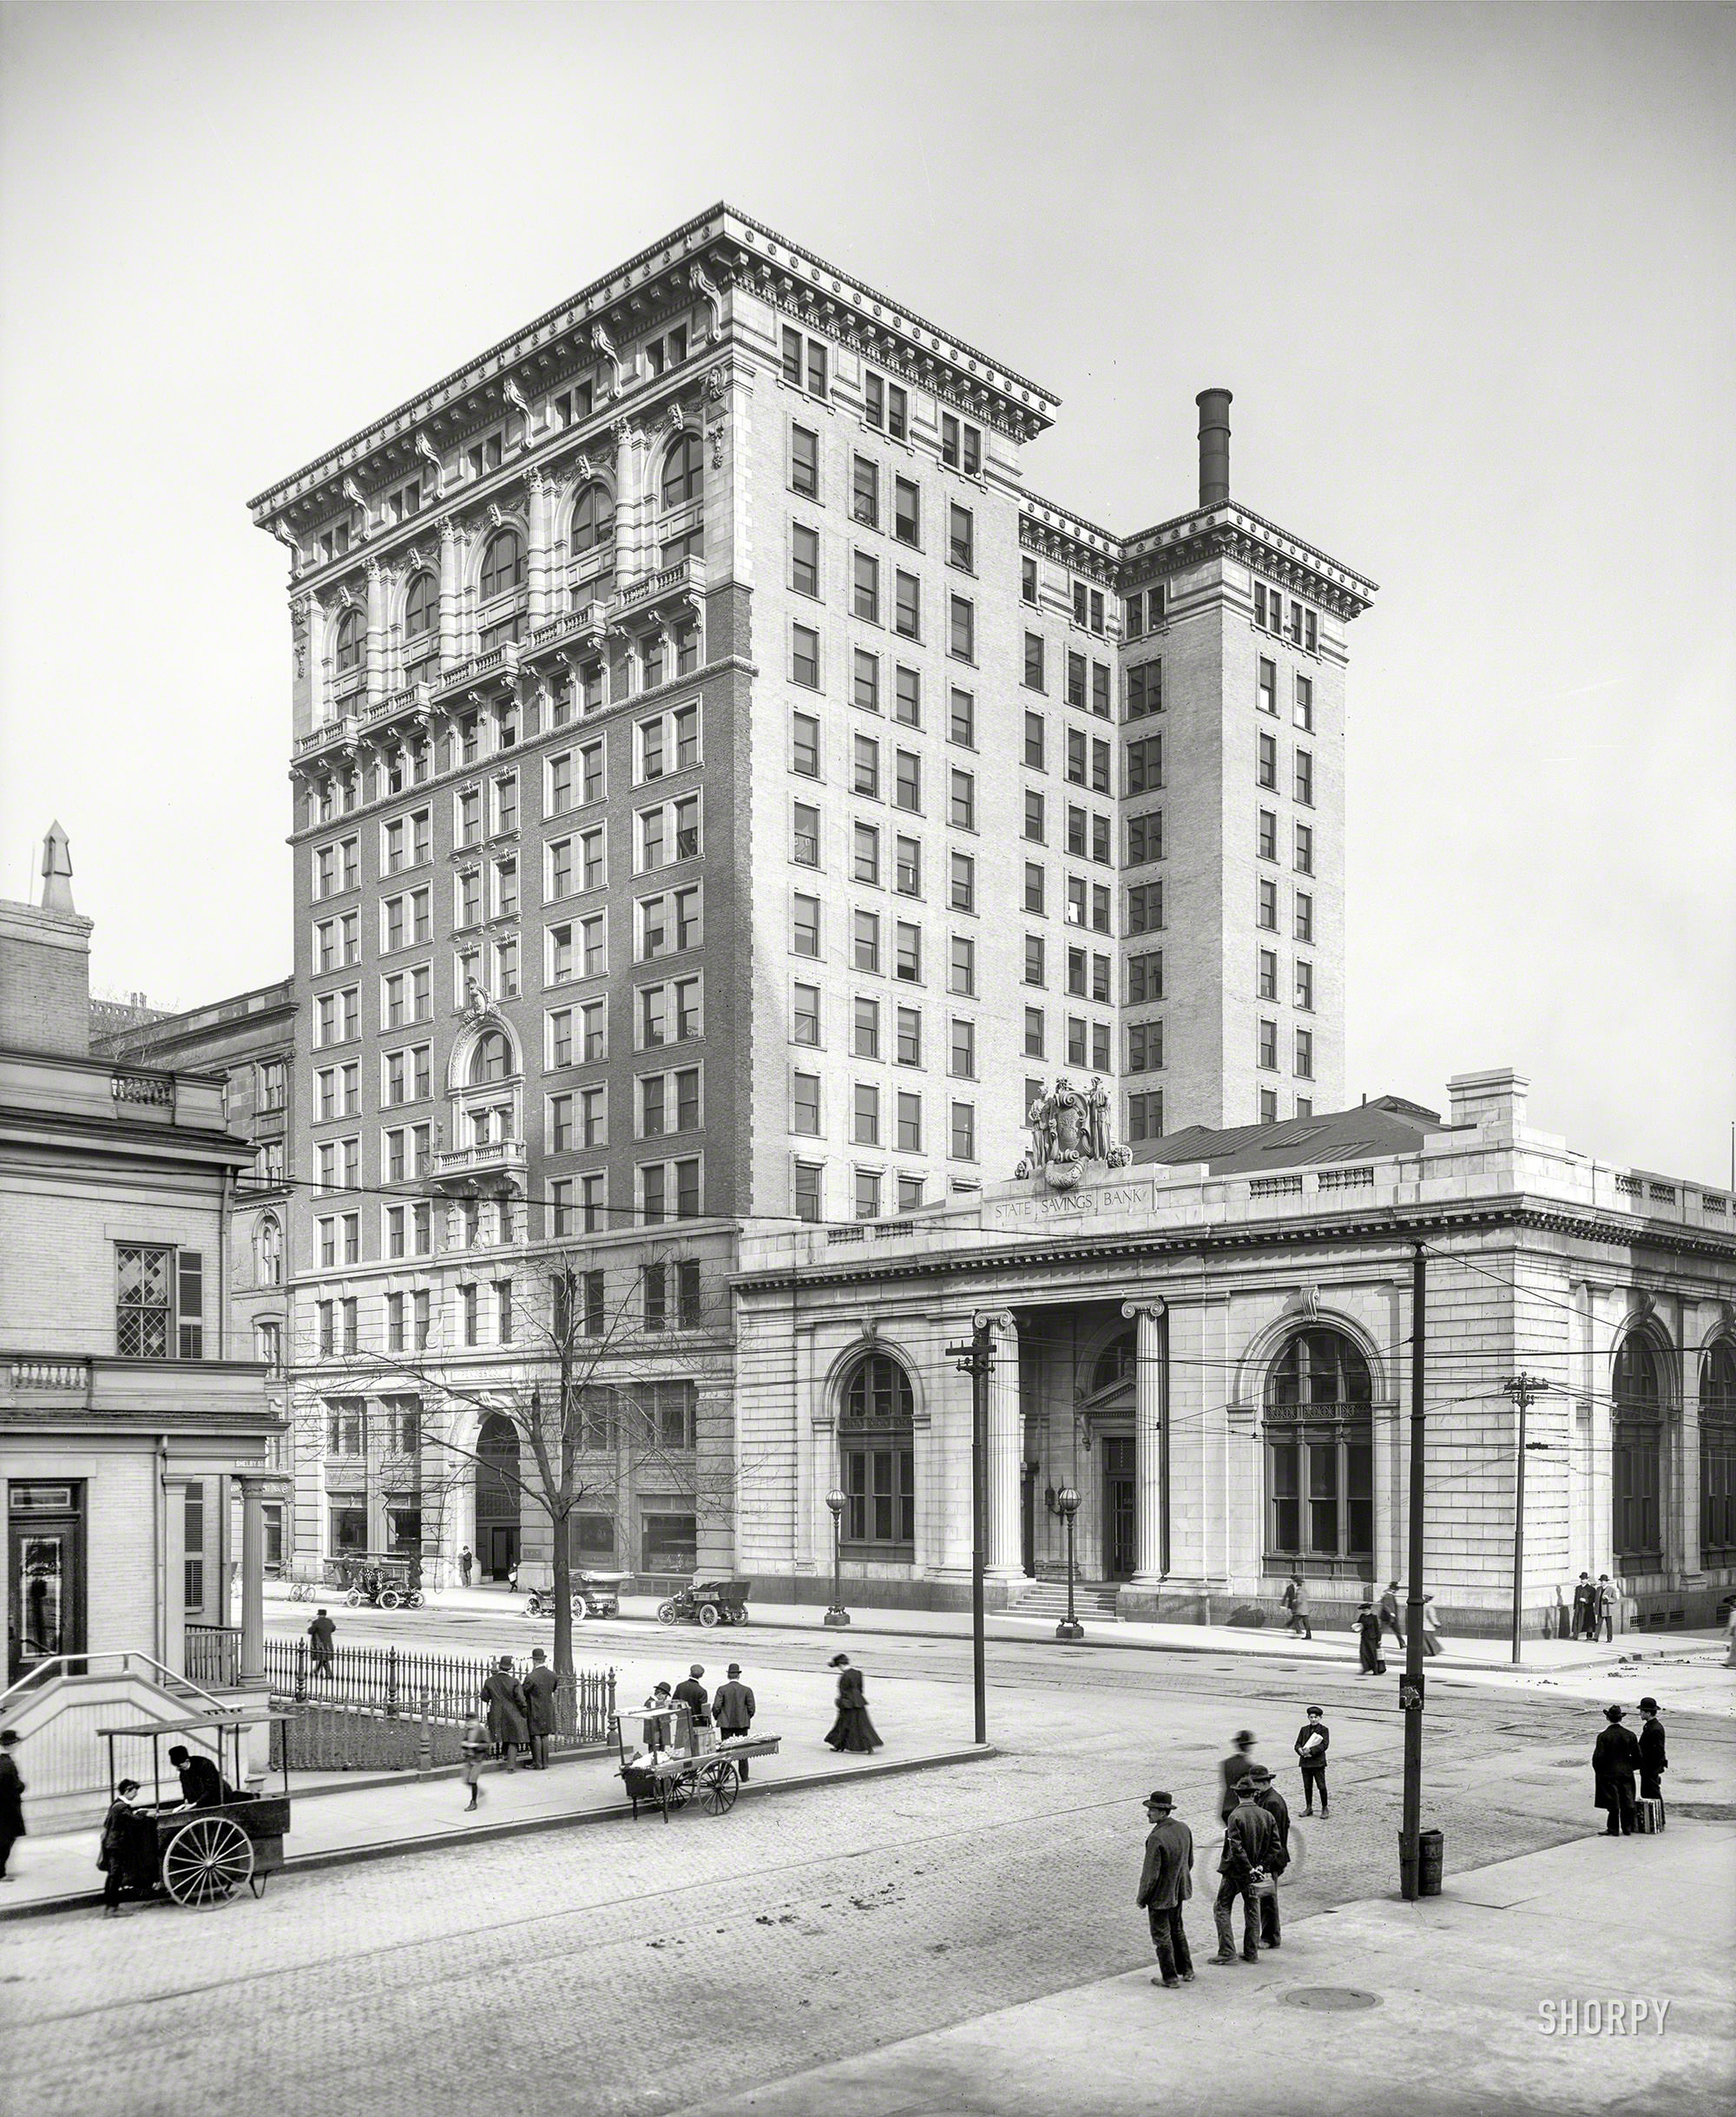 Penobscot Building and State Savings Bank, Fort and Shelby Streets, Detroit, 1907